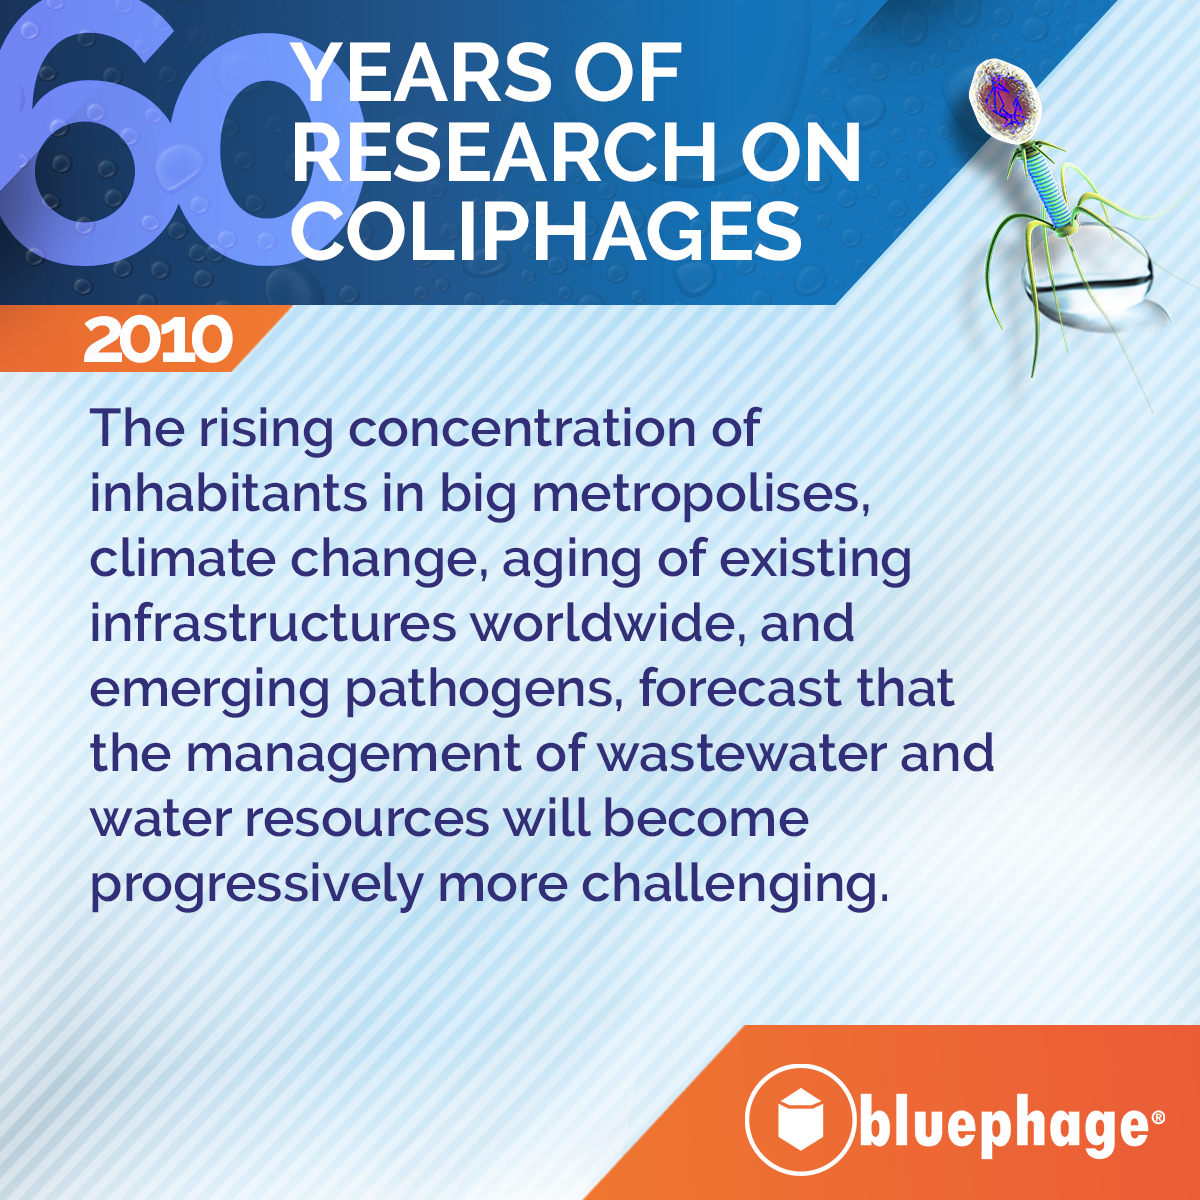 60 years coliphages research 11